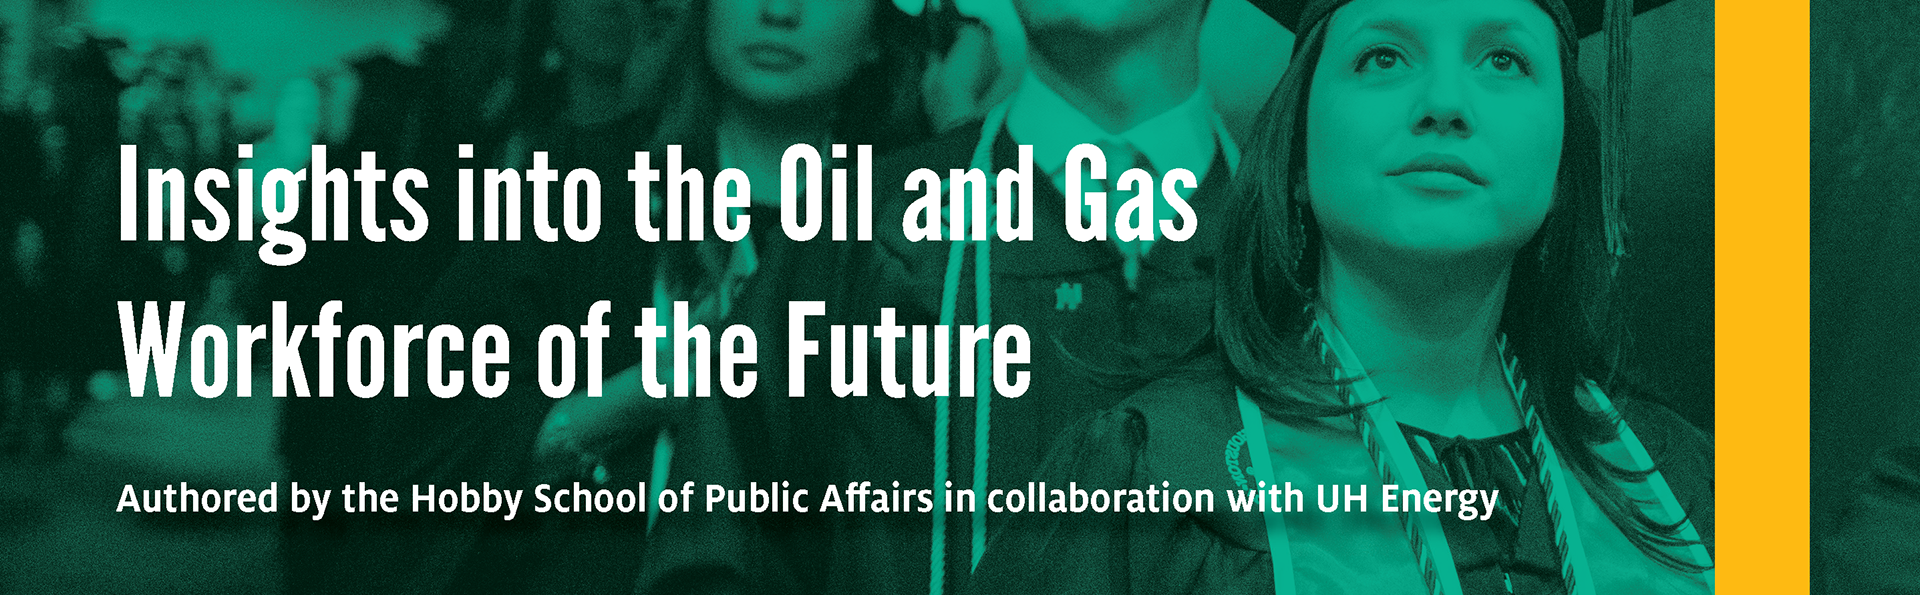 Insights Into the Oil and Gas Workforce of the Future